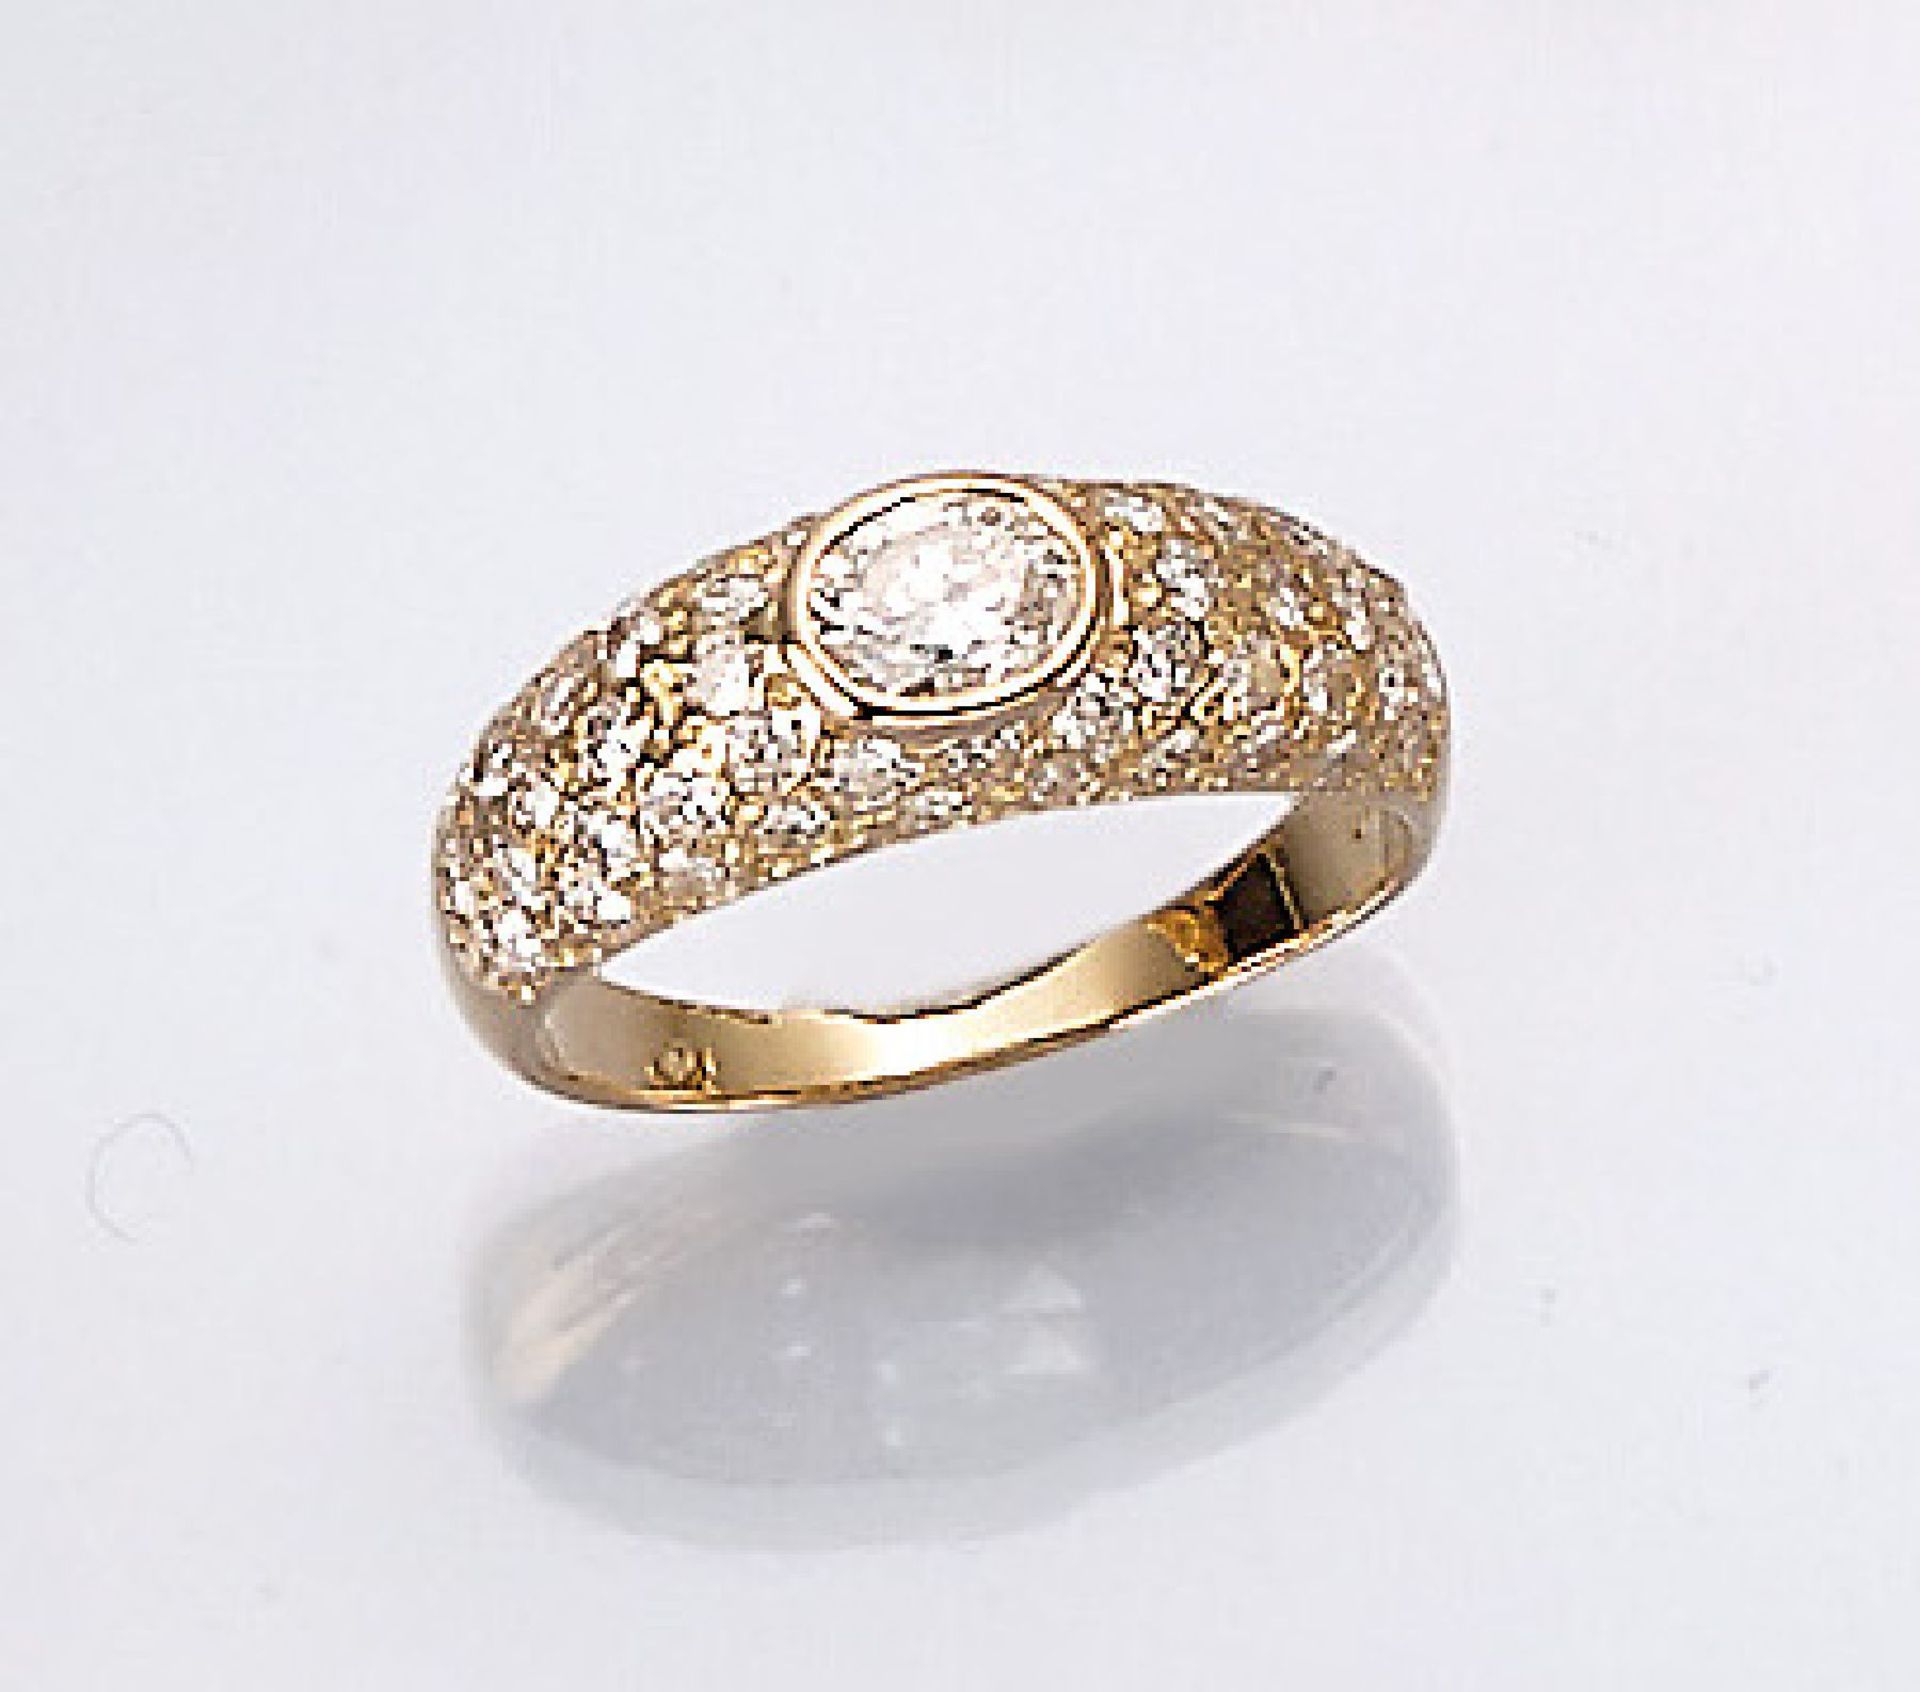 18 kt gold ring with diamonds , YG 750/000, centered oval diamond approx. 0.30 ct Top Wesselton-